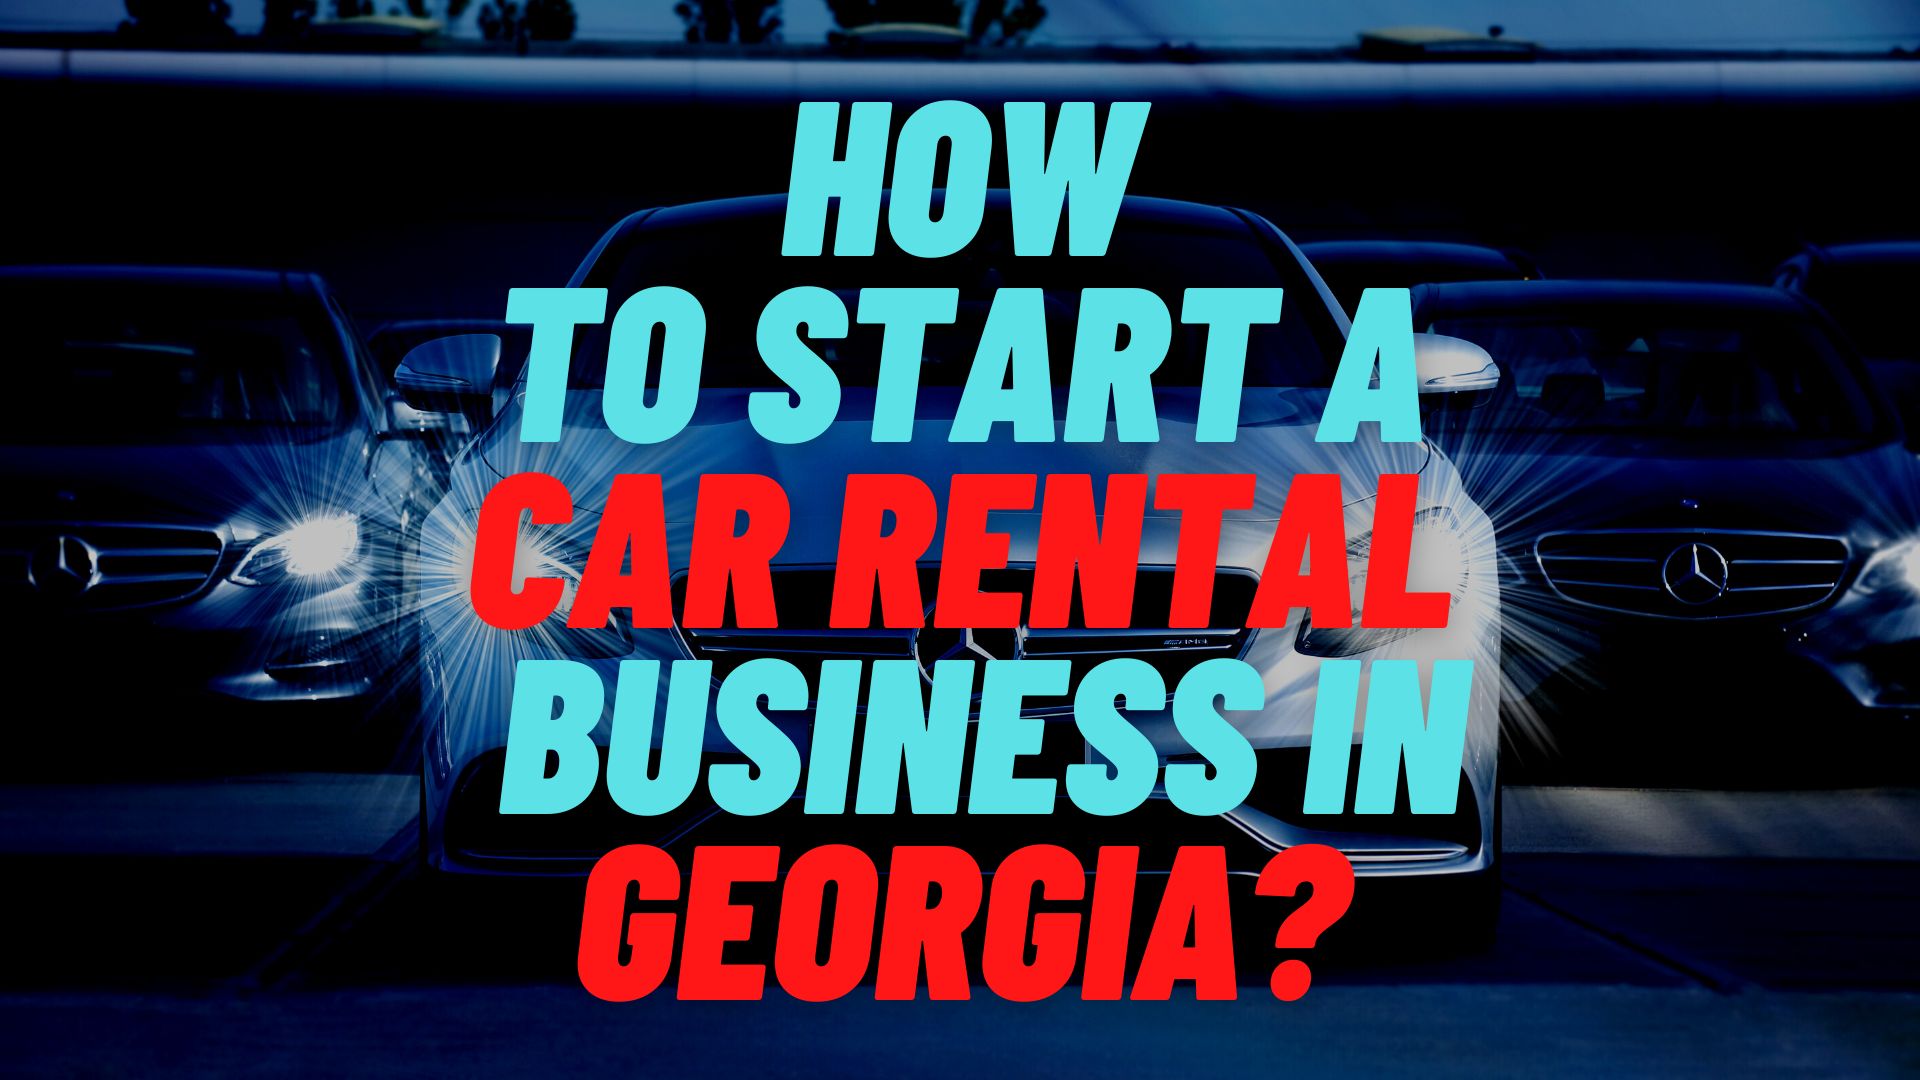 How to start a car rental business in Georgia